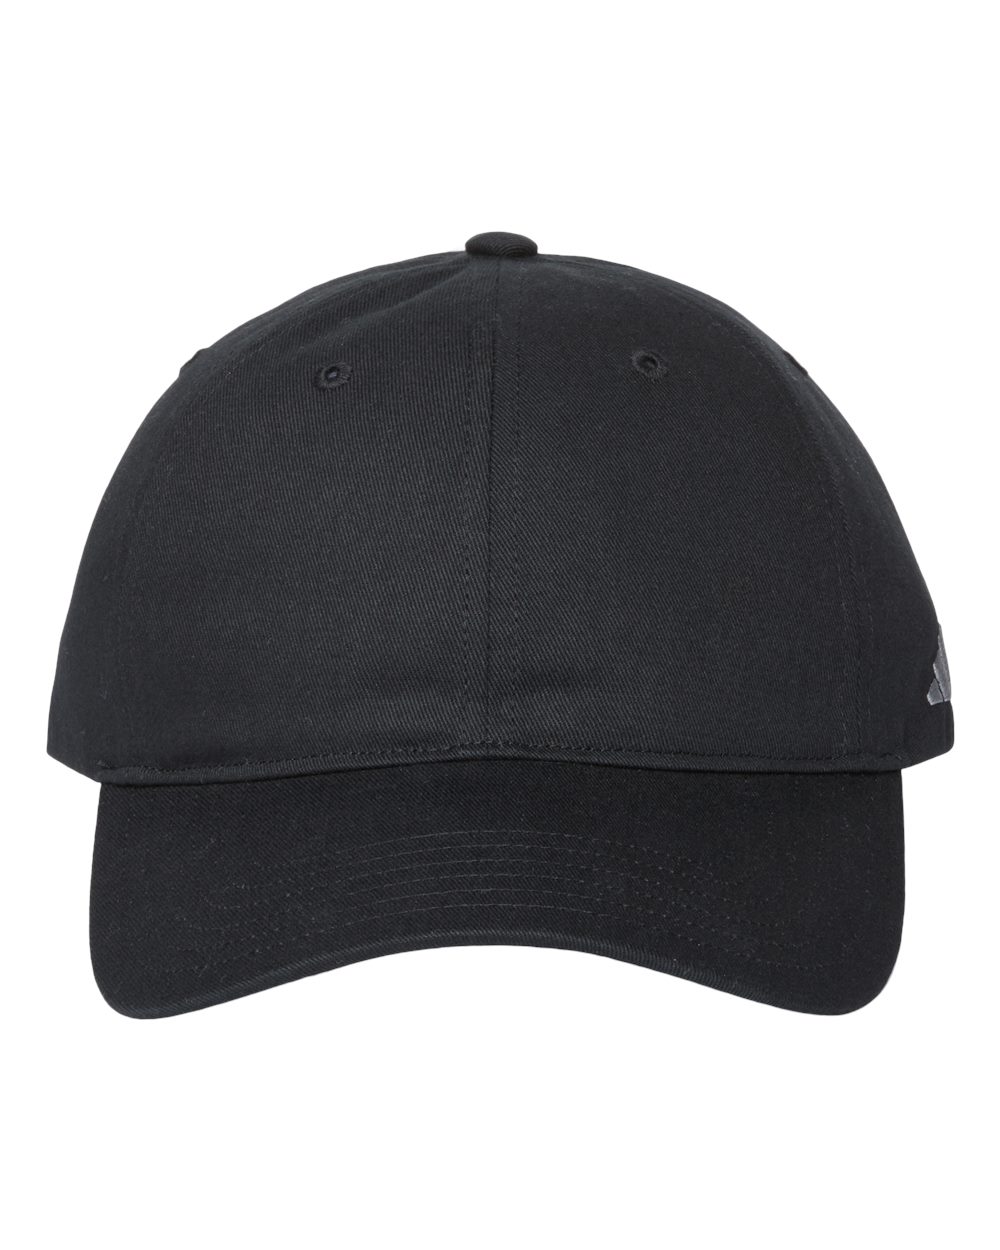 A12S Sustainable Adidas Golf Cap. Relaxed Organic